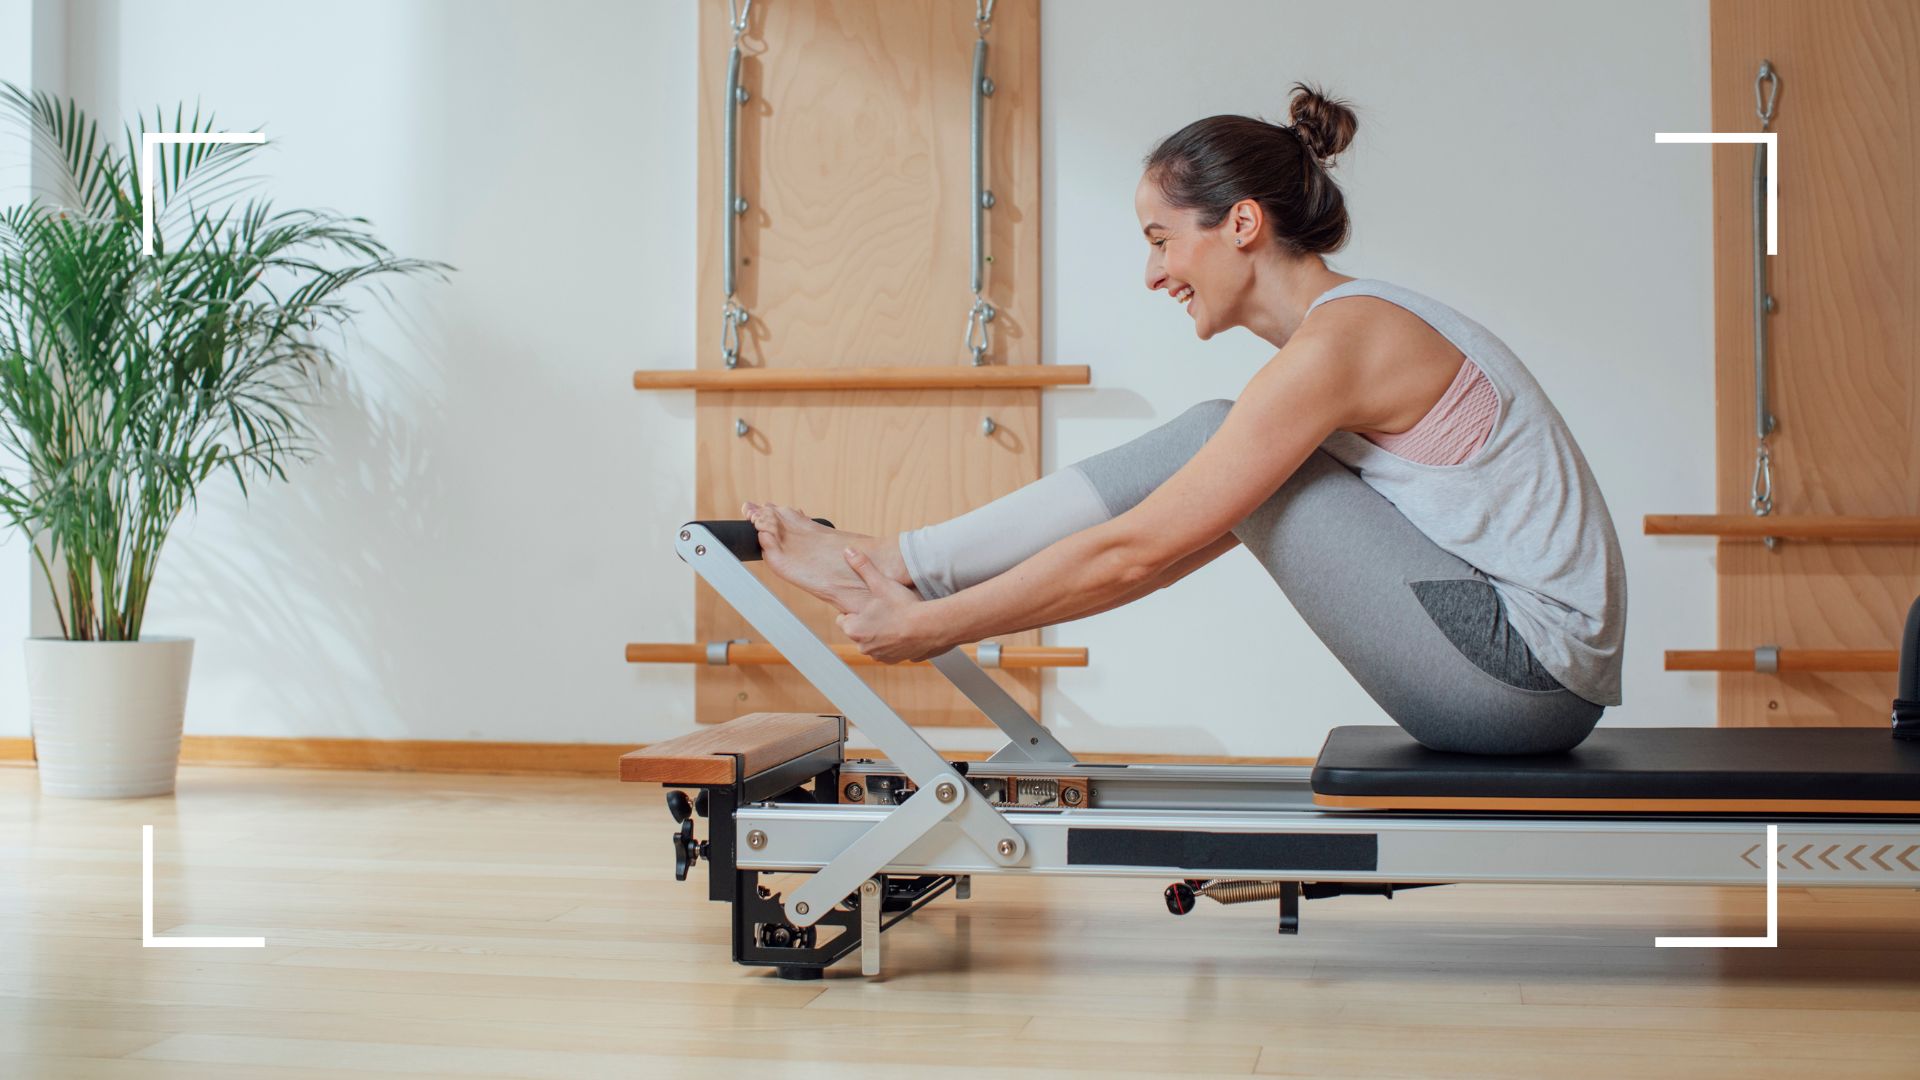 I Tried a Pilates Reformer Workout And Now Everything Hurts